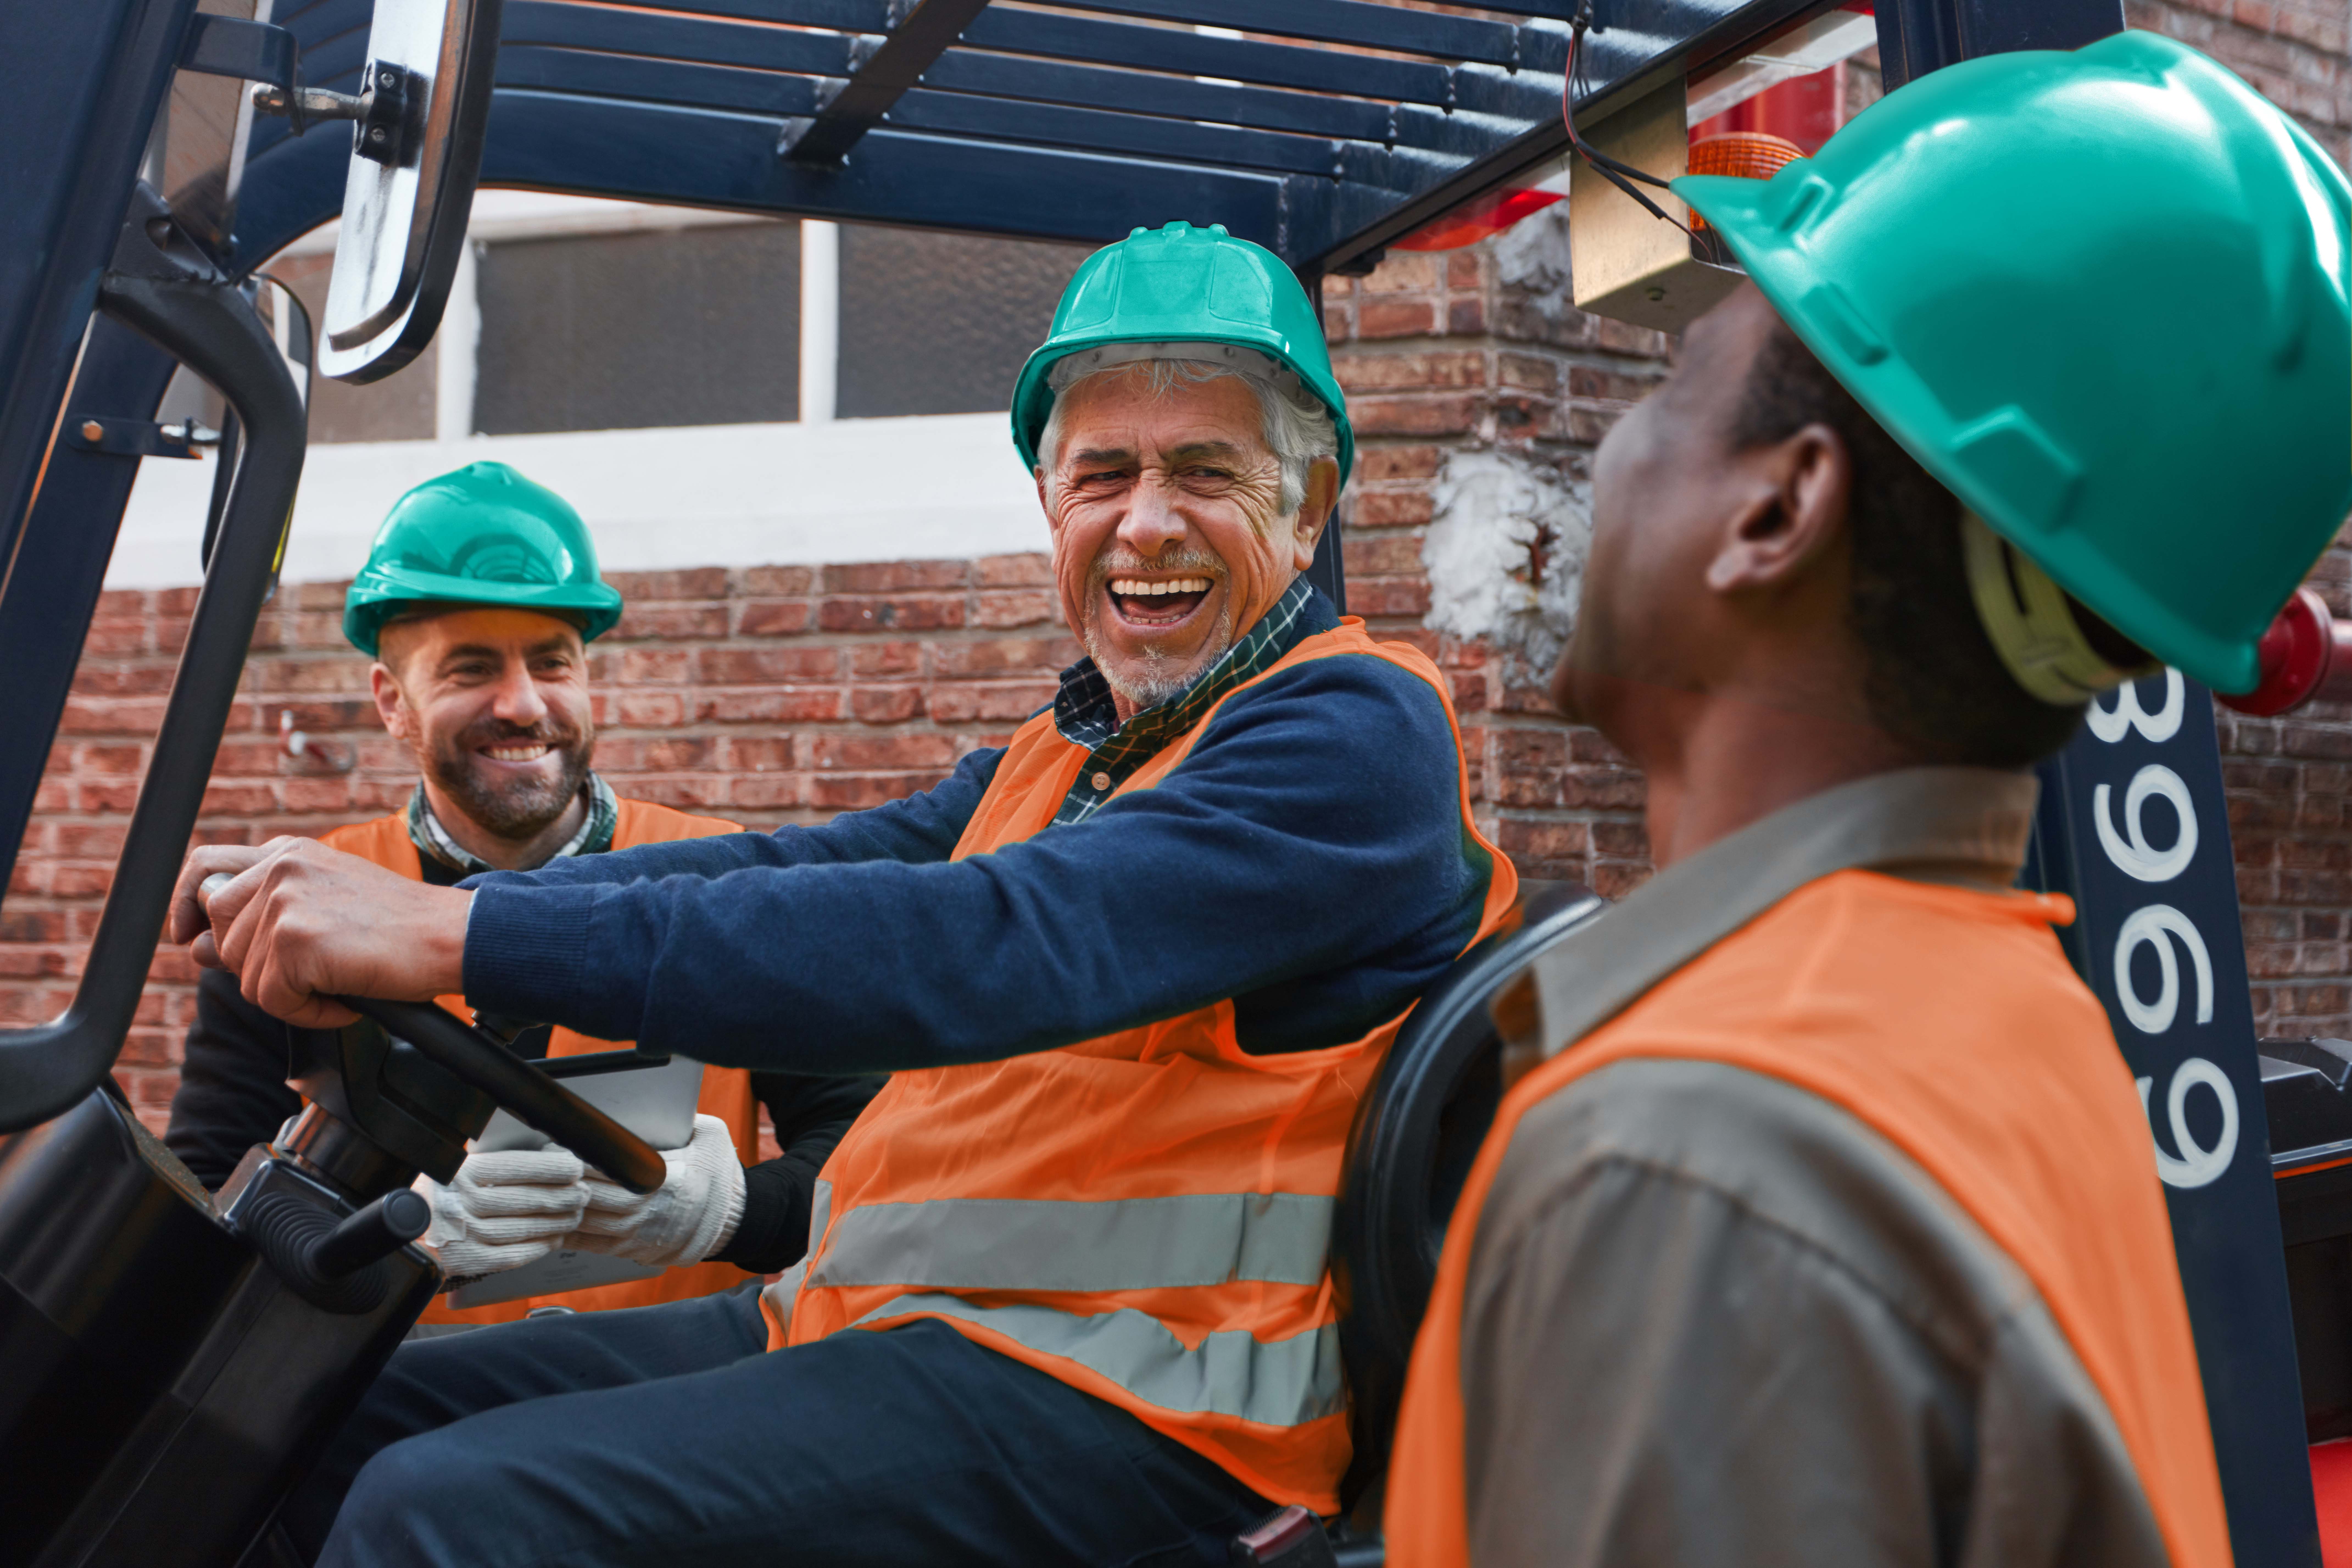 A group of workers having a laugh together whilst working.